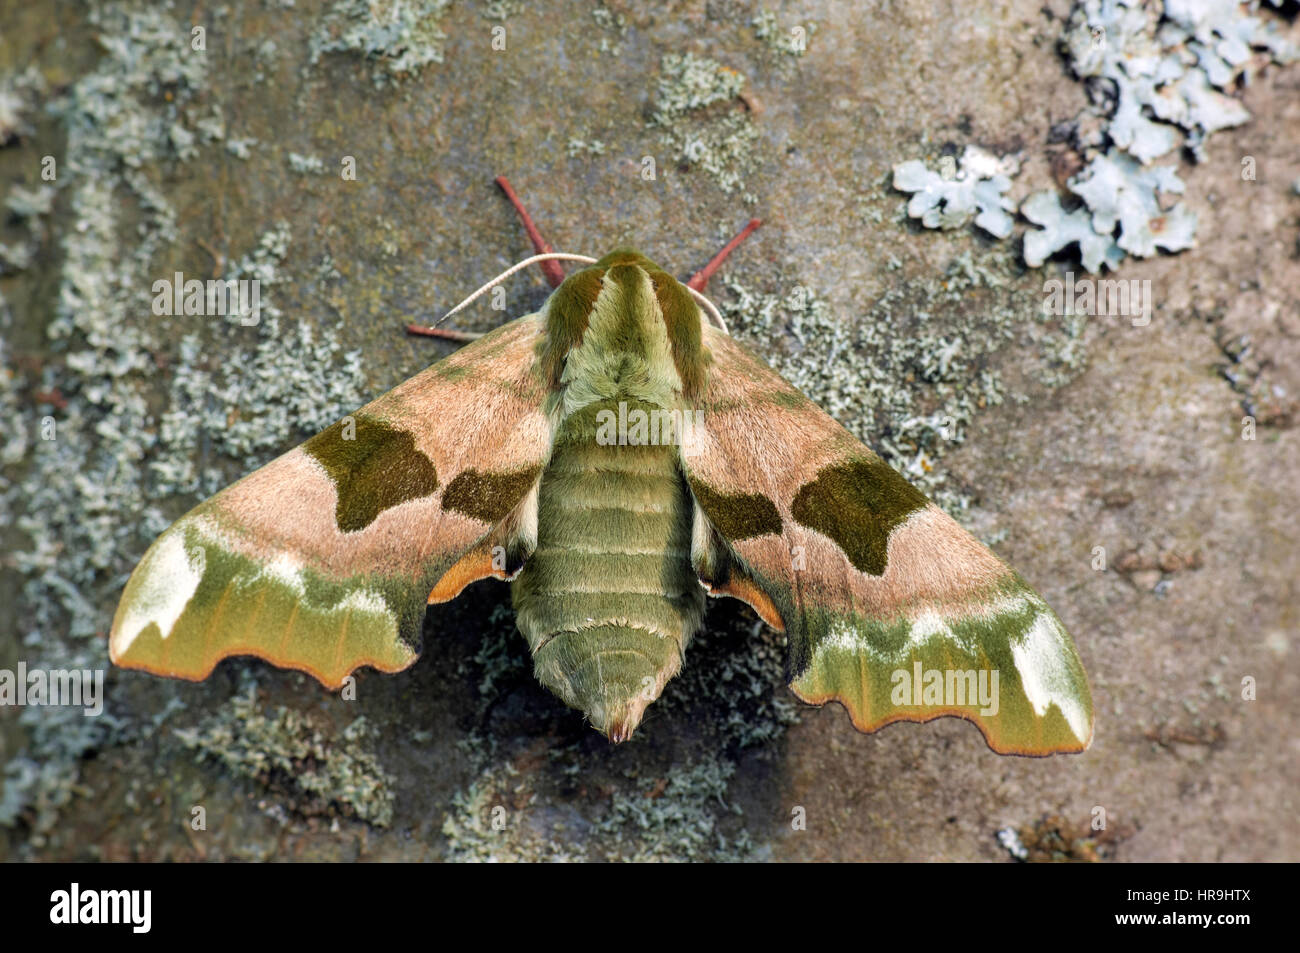 Lime Hawk Moth(Mimas tiliae) resting on a Lichen covered tree. Stock Photo